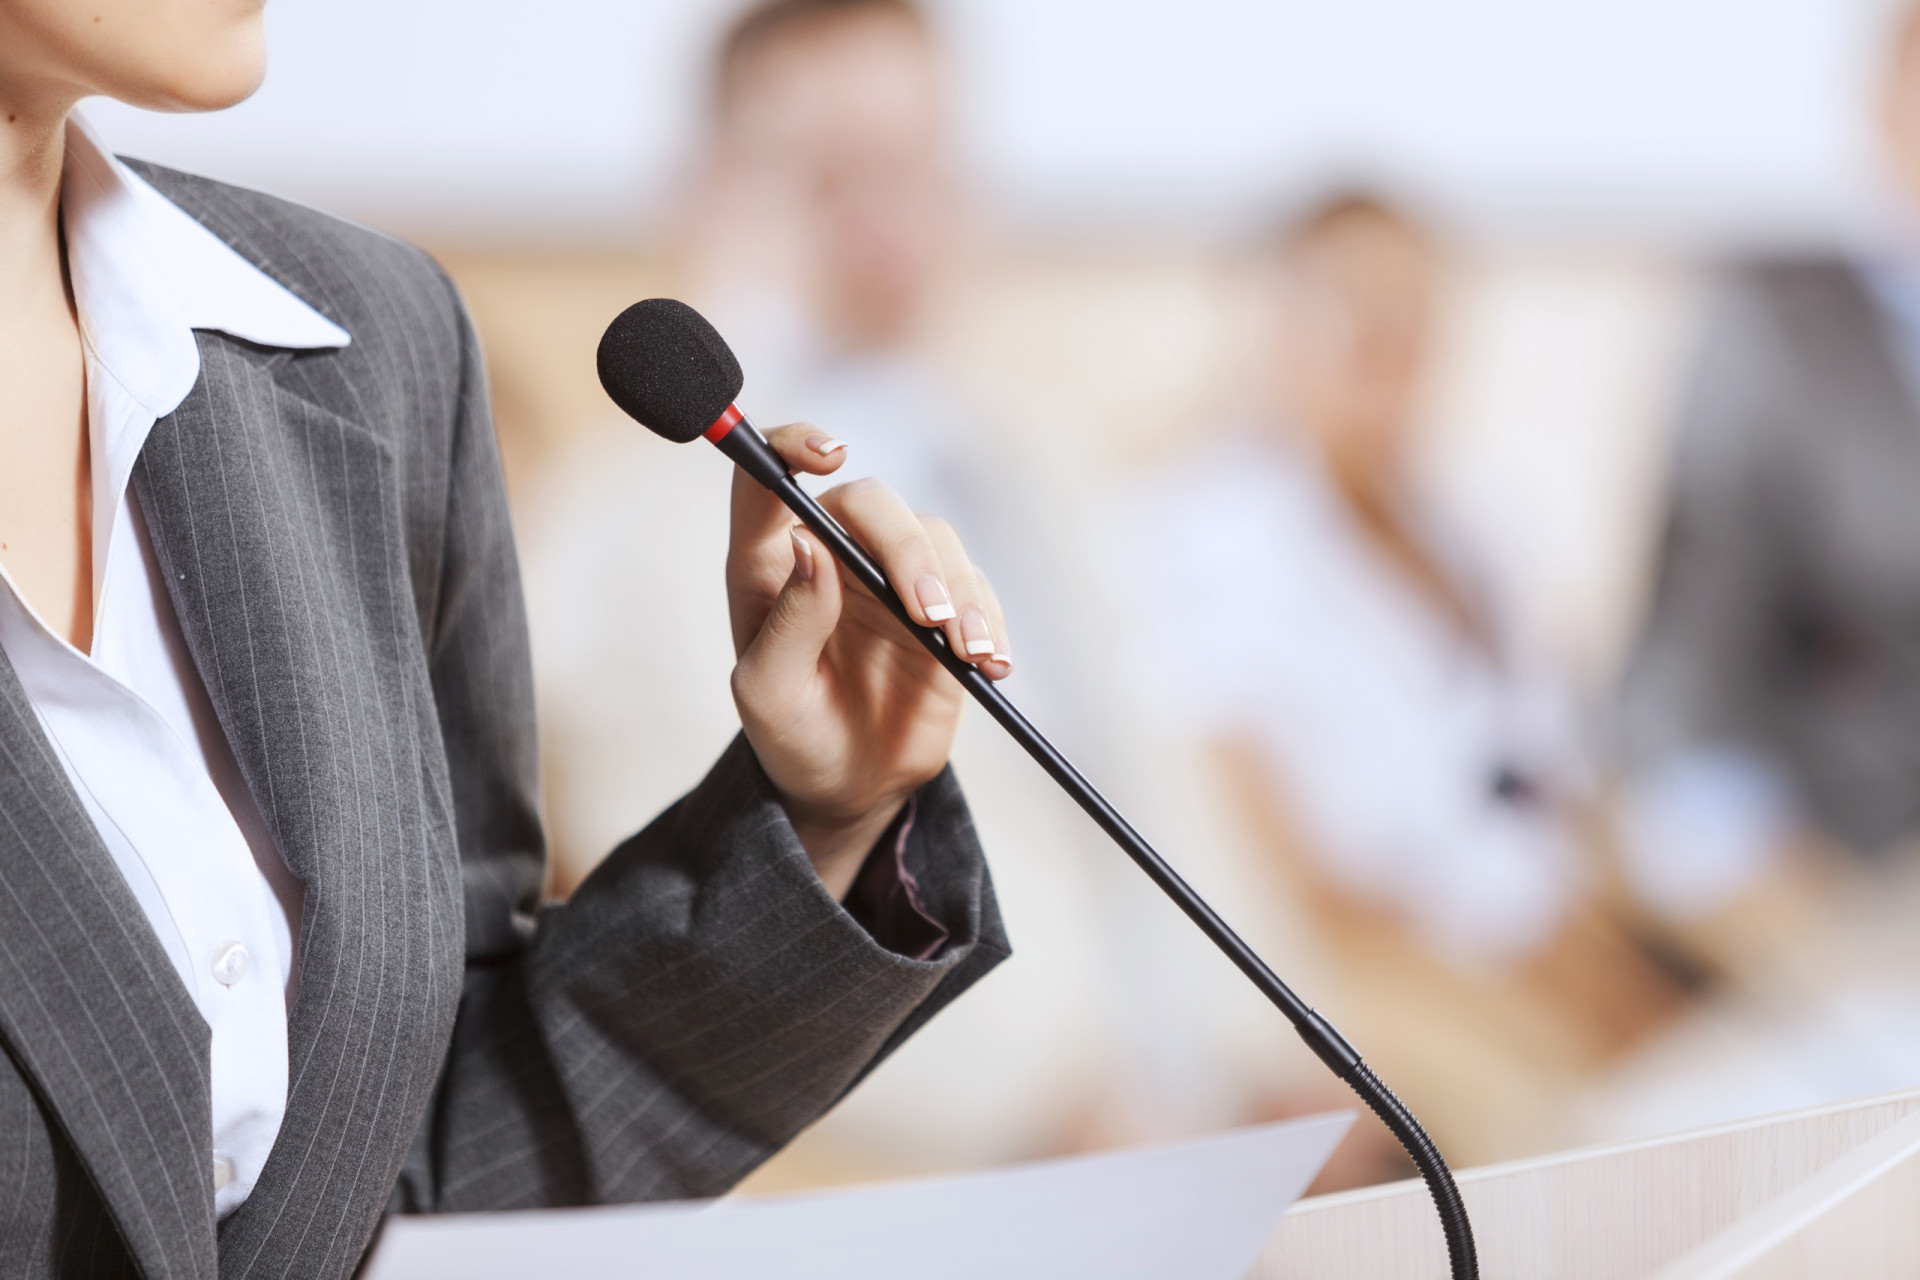 <p><span>If you are not a confident speaker, there is nothing better you can do than to practice. Whether it’s public speaking or casual conversation you find difficult, practice makes perfect.</span></p><p><a href="https://www.msn.com/en-us/community/channel/vid-7xx8mnucu55yw63we9va2gwr7uihbxwc68fxqp25x6tg4ftibpra?cvid=94631541bc0f4f89bfd59158d696ad7e">Follow us and access great exclusive content every day</a></p>